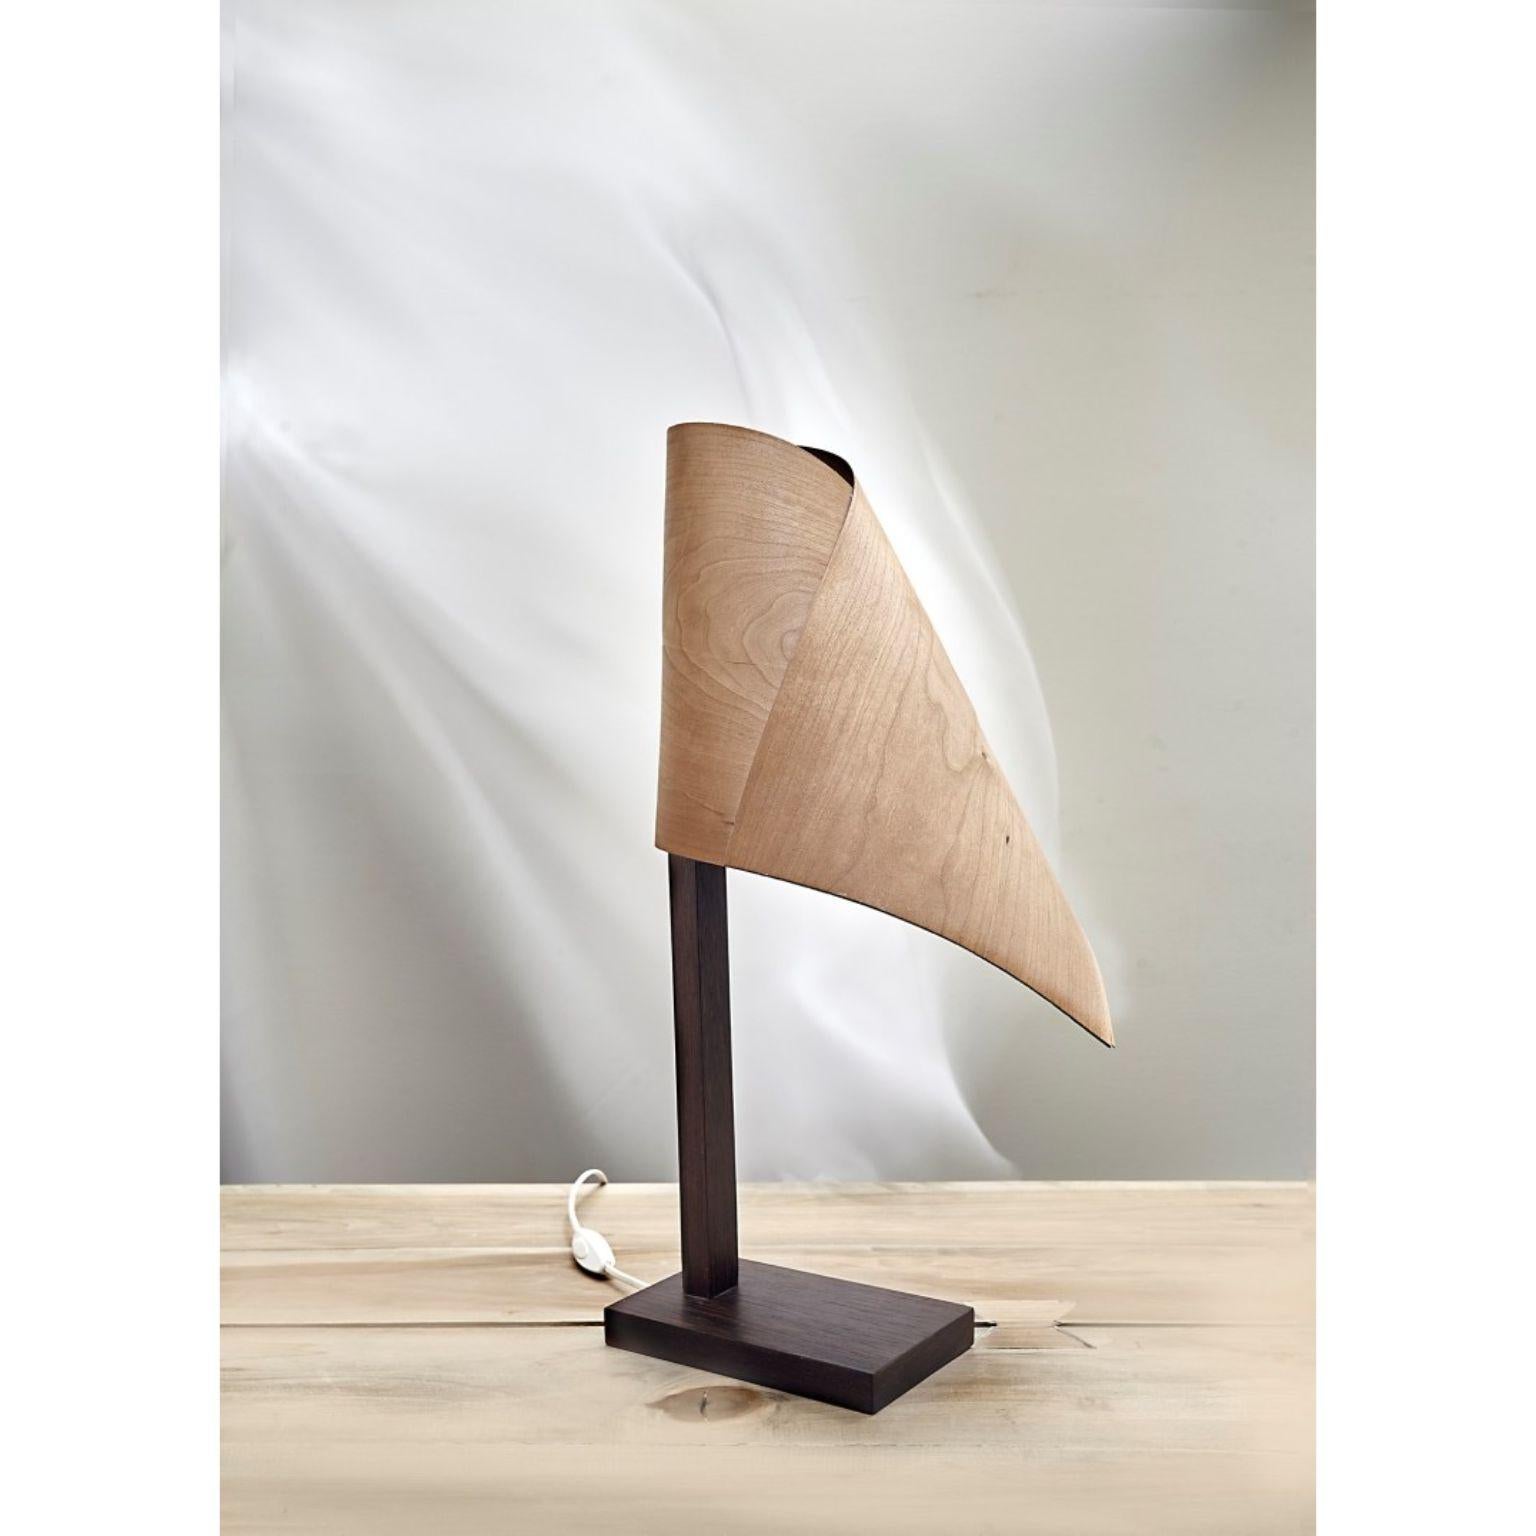 Drapé lamp by Jean-Baptiste Van den Heede
Signed, limited edition
Dimensions: 56cm high
Materials: Wenge wood, natural maple wood veneer


The Drapé table lamp is made of solid wenge wood with a shade of natural maple wood veneer.
A second